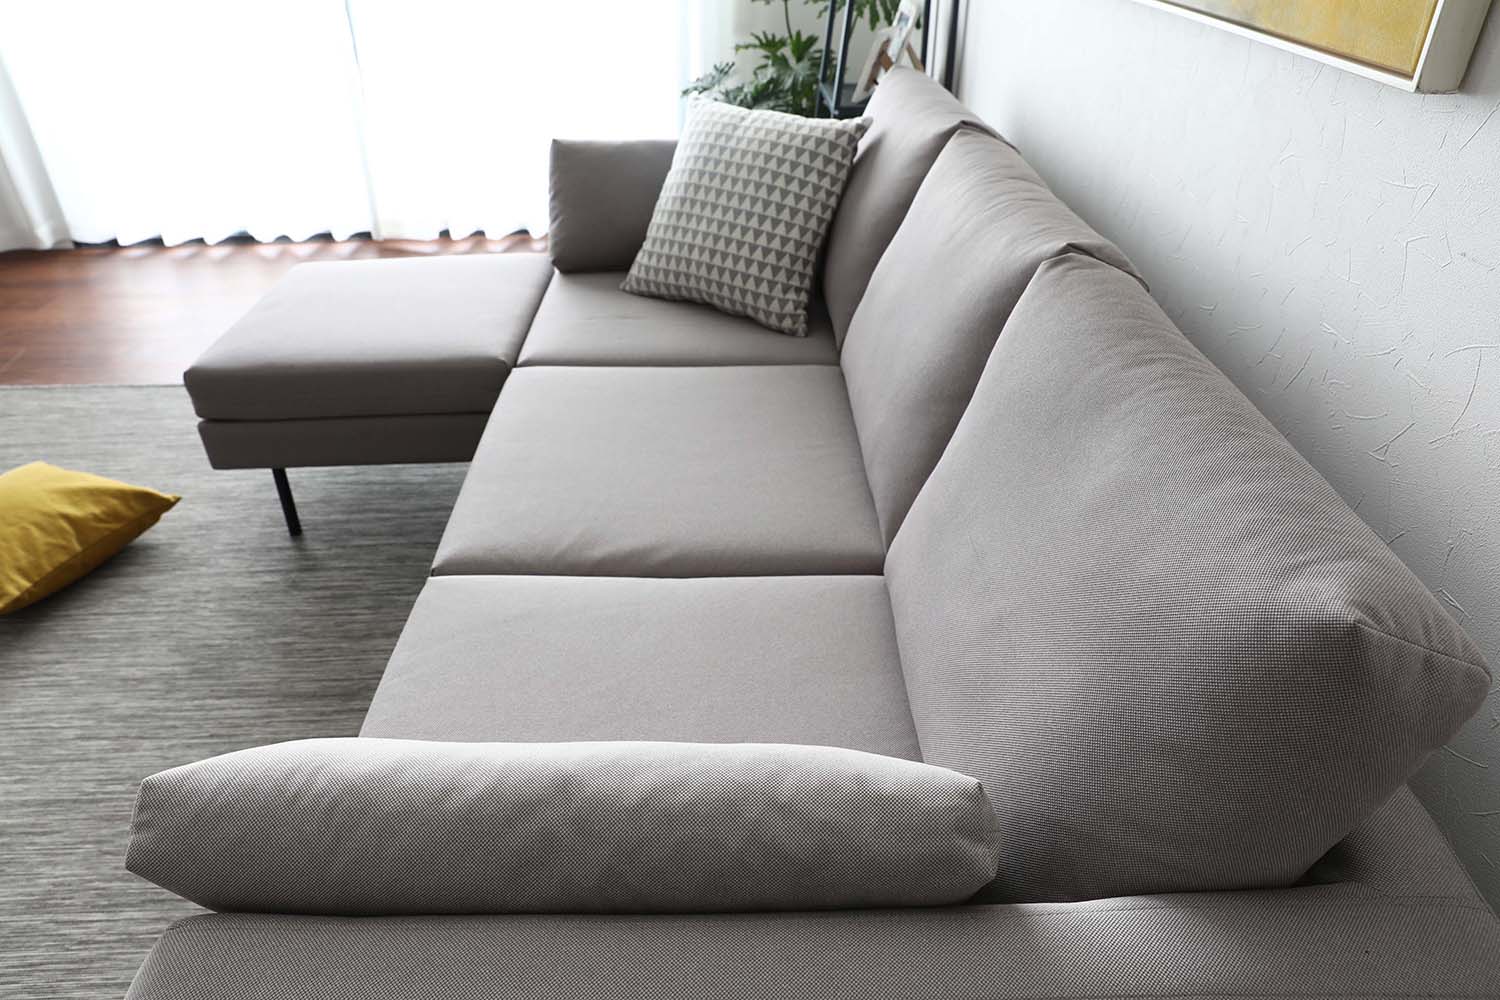 Side view of the Luna Sofa L-Shaped 3 seater sofa showcasing its ability to comfortably accommodate 3 seaters. 